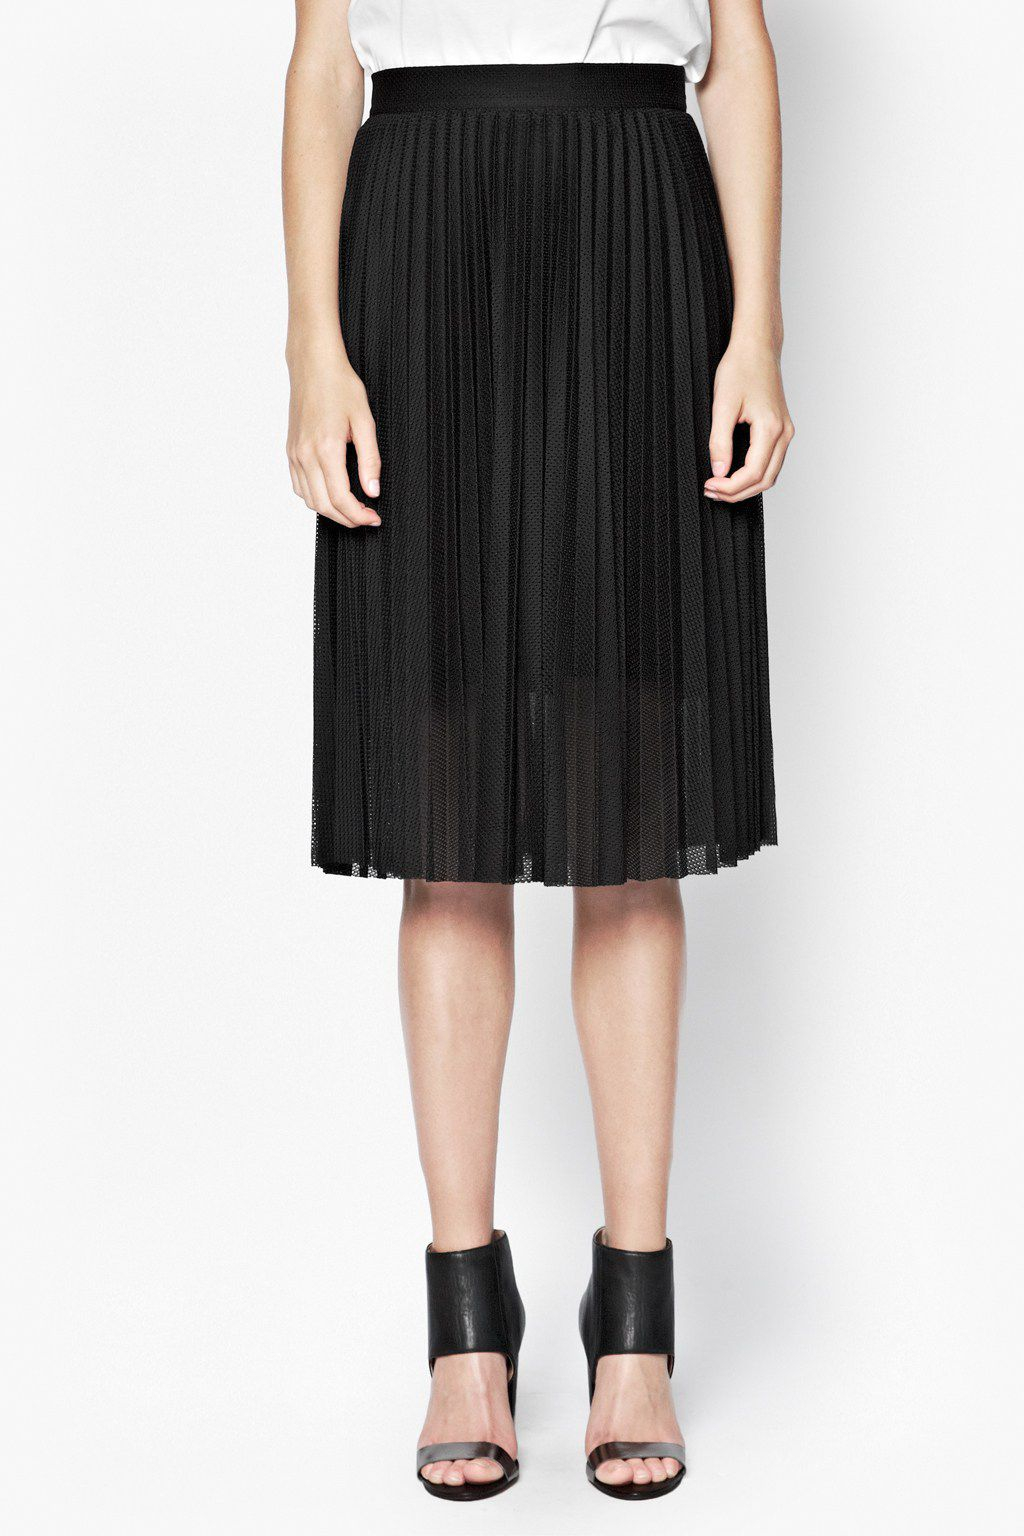 French connection Leah Jersey Pleated Skirt in Black | Lyst